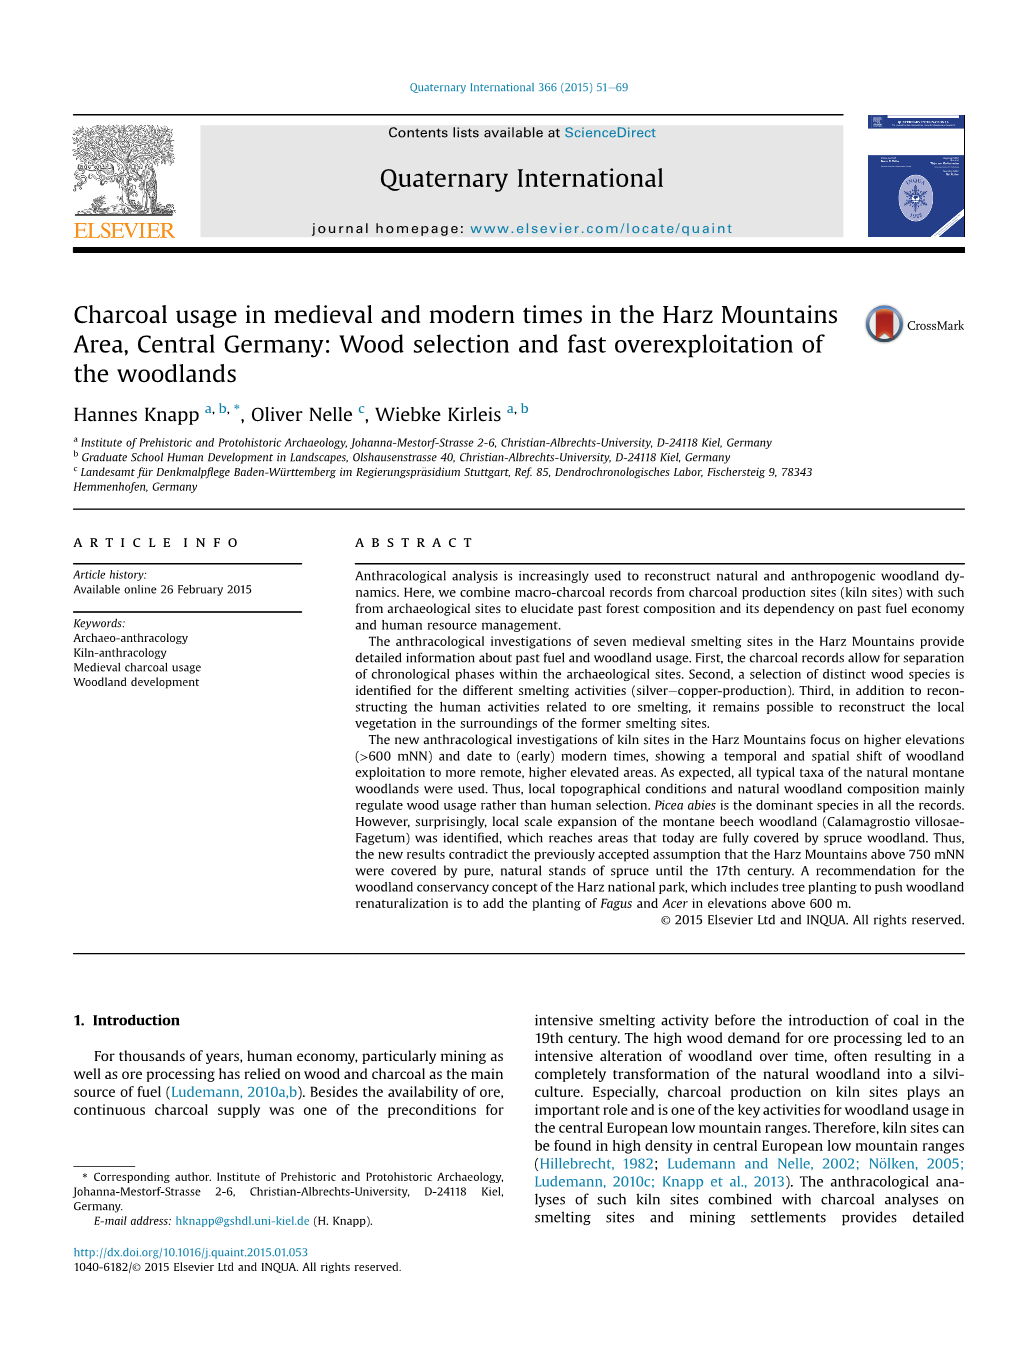 Charcoal Usage in Medieval and Modern Times in the Harz Mountains Area, Central Germany: Wood Selection and Fast Overexploitation of the Woodlands